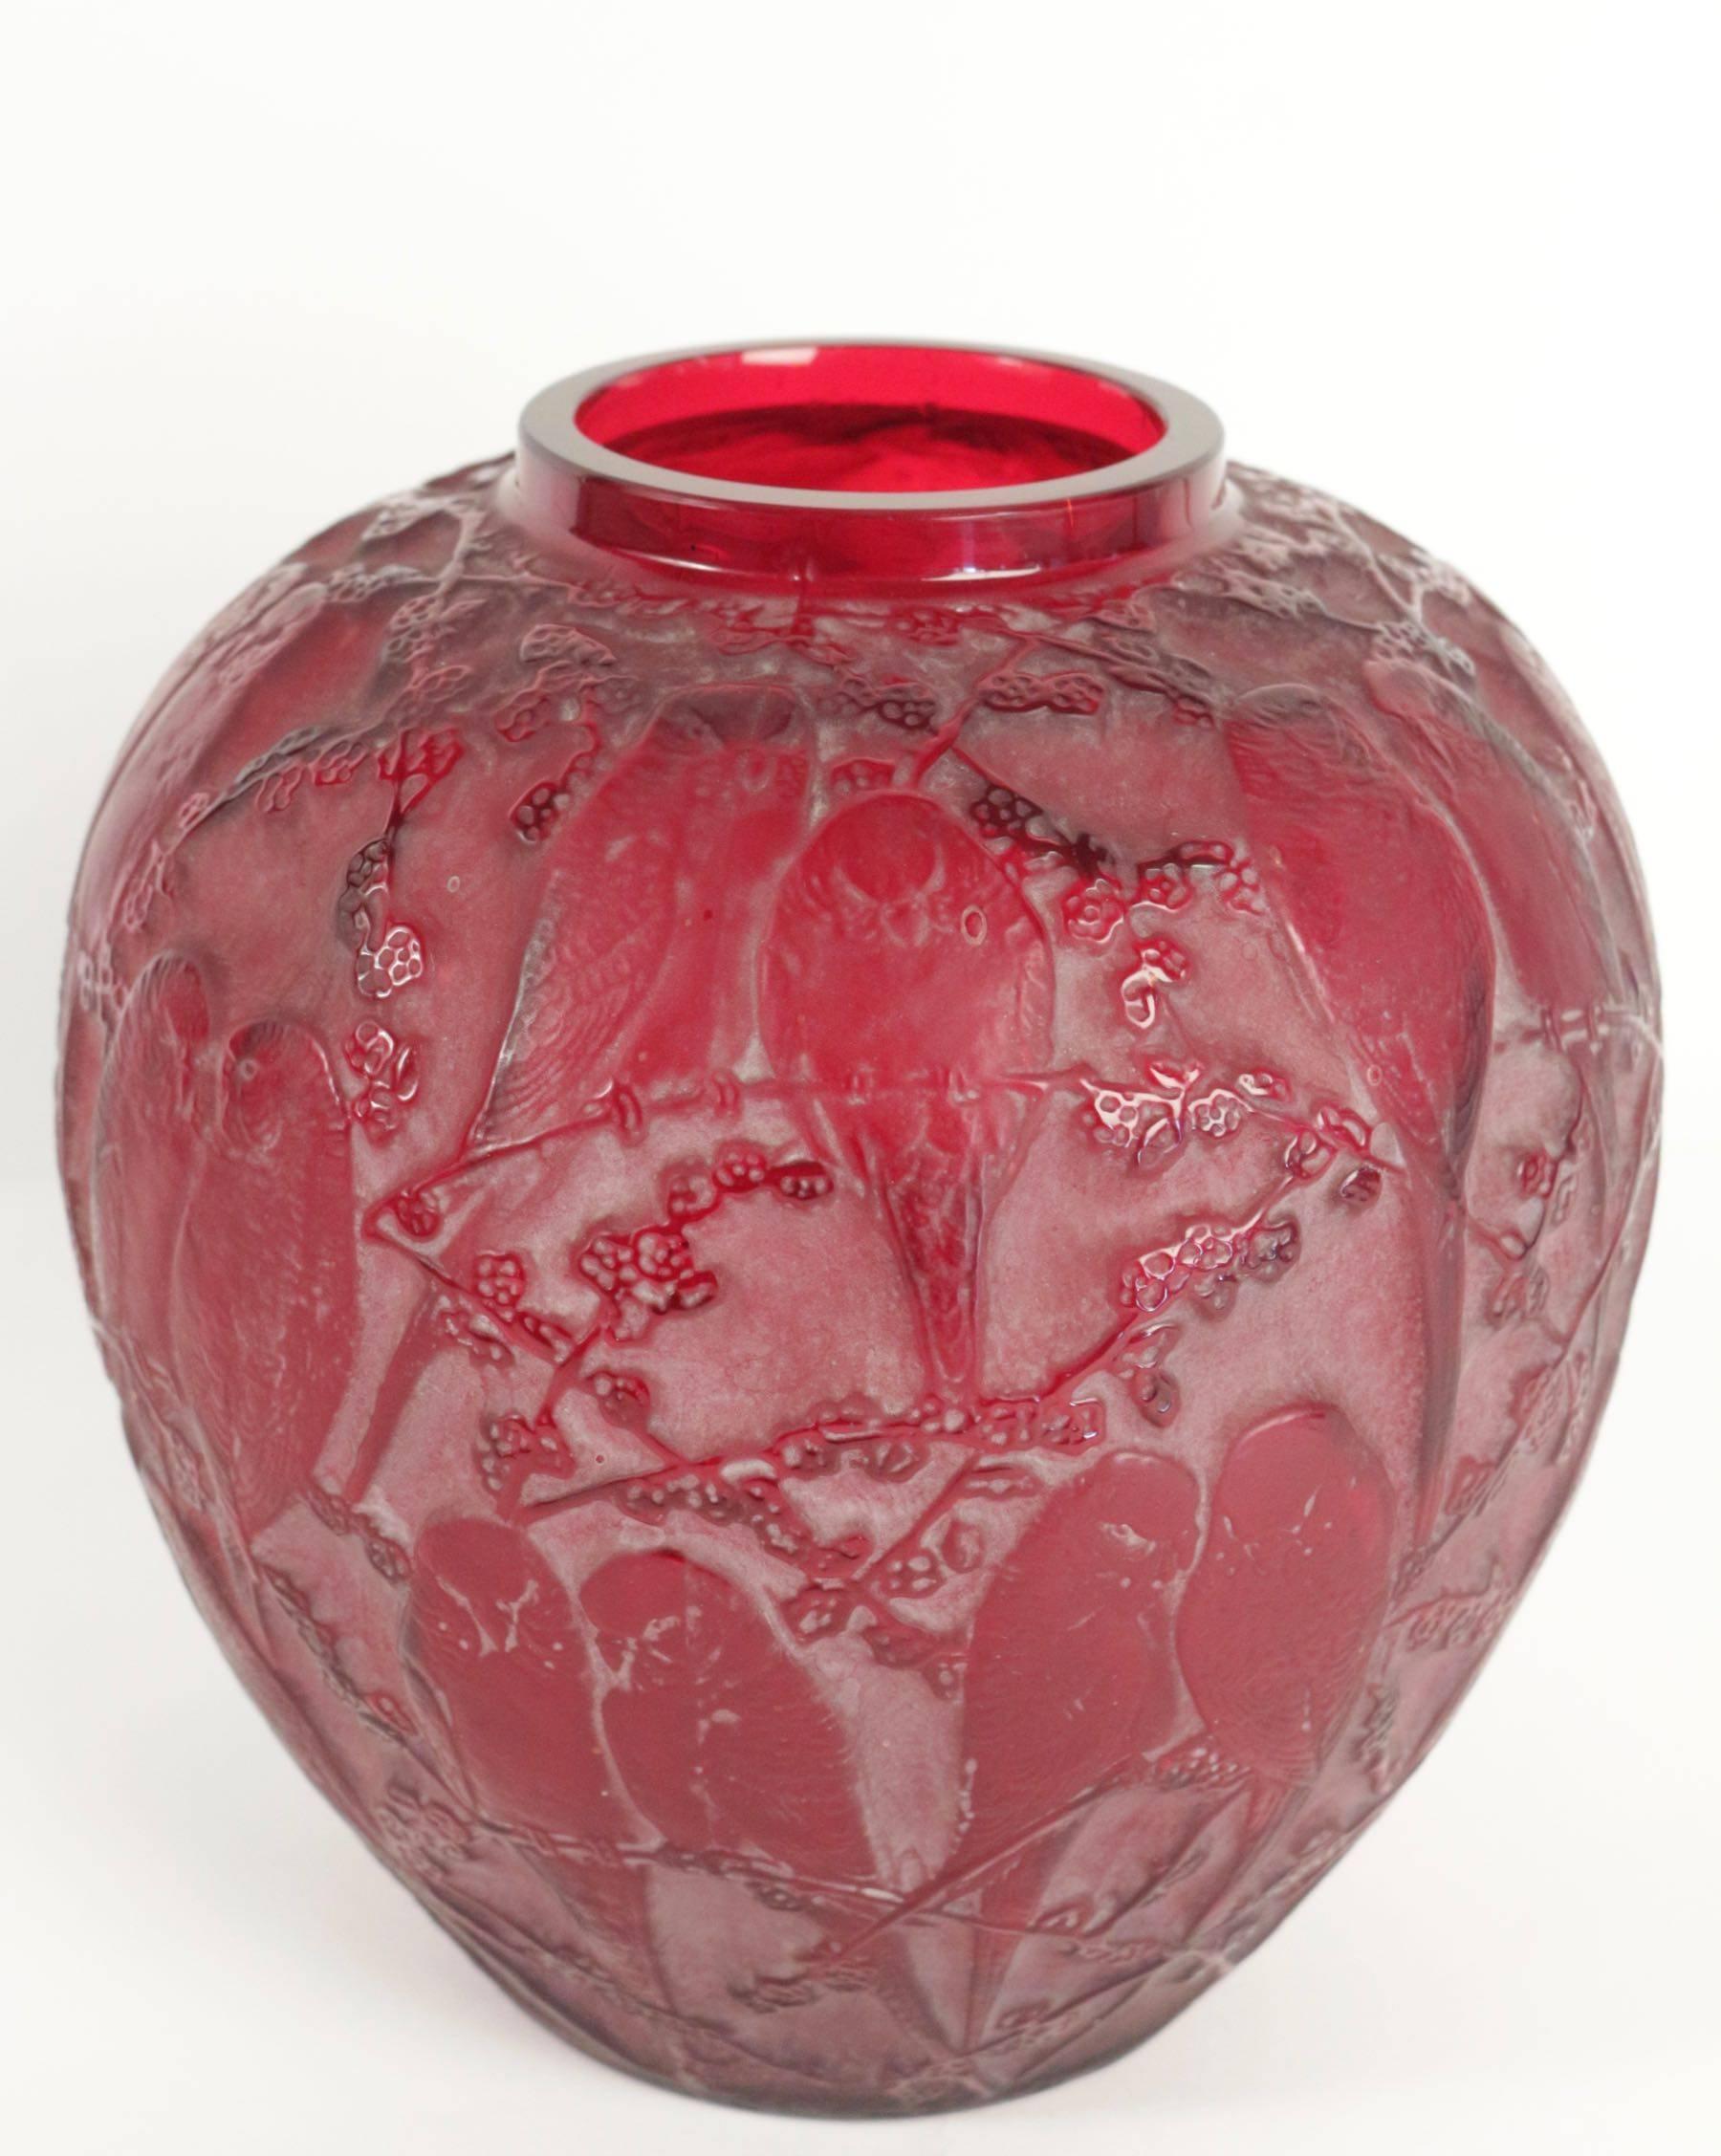 Rene Lalique (1860-1945).
Red glass decorated all-over with a design of pairs of small birds perched amongst foliage.
Likelythe most beautiful example that reached the market in decades!

Vase 